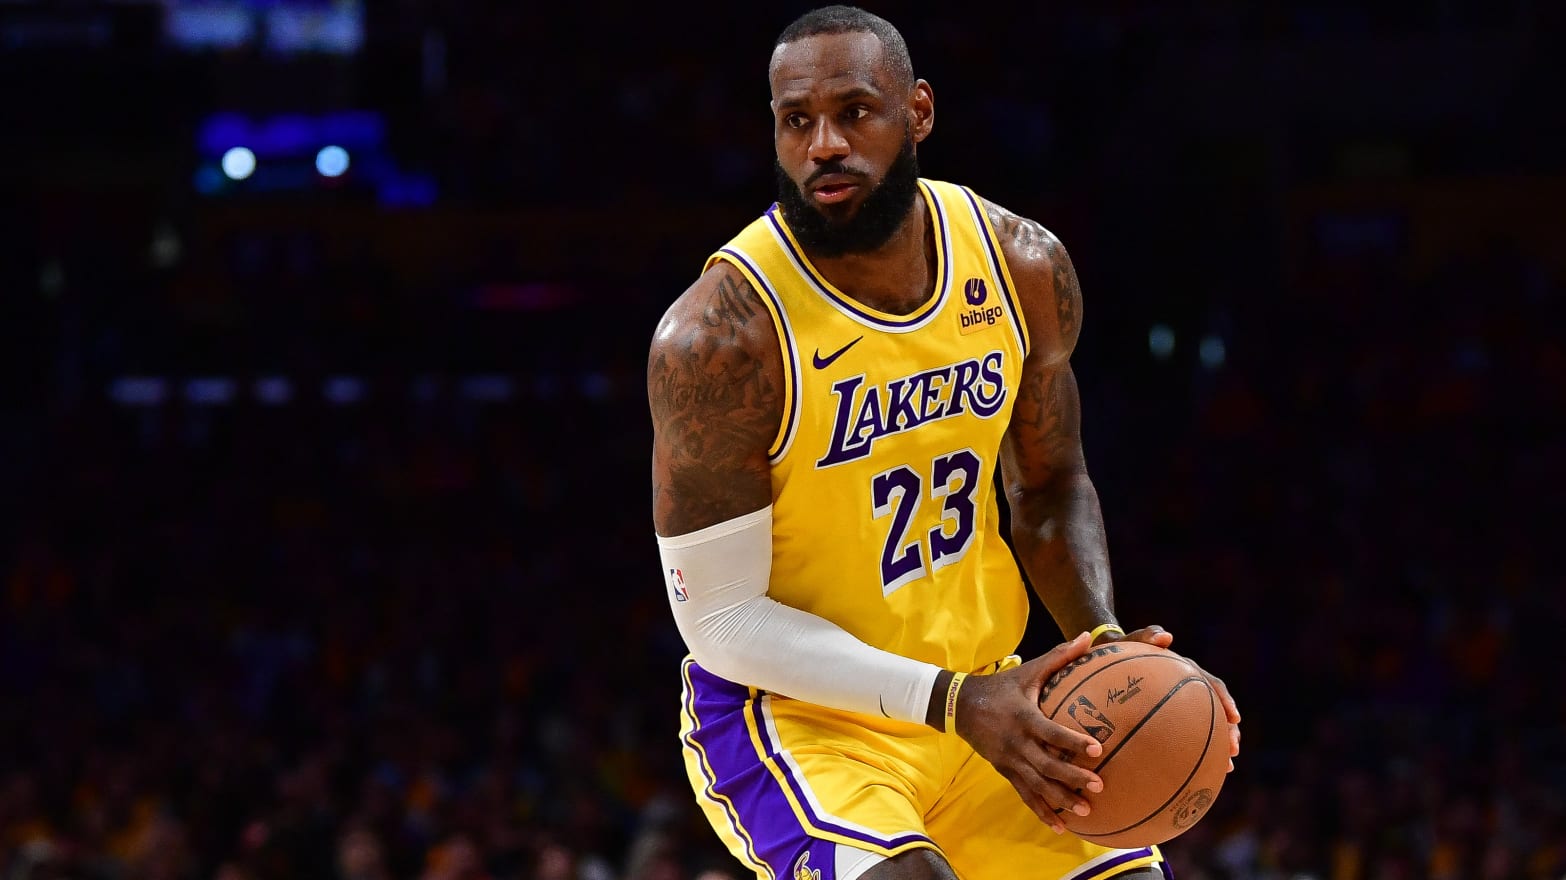 LeBron James has agreed a two-year deal to stay at the Los Angeles Lakers, potentially playing alongside his son Bronny.